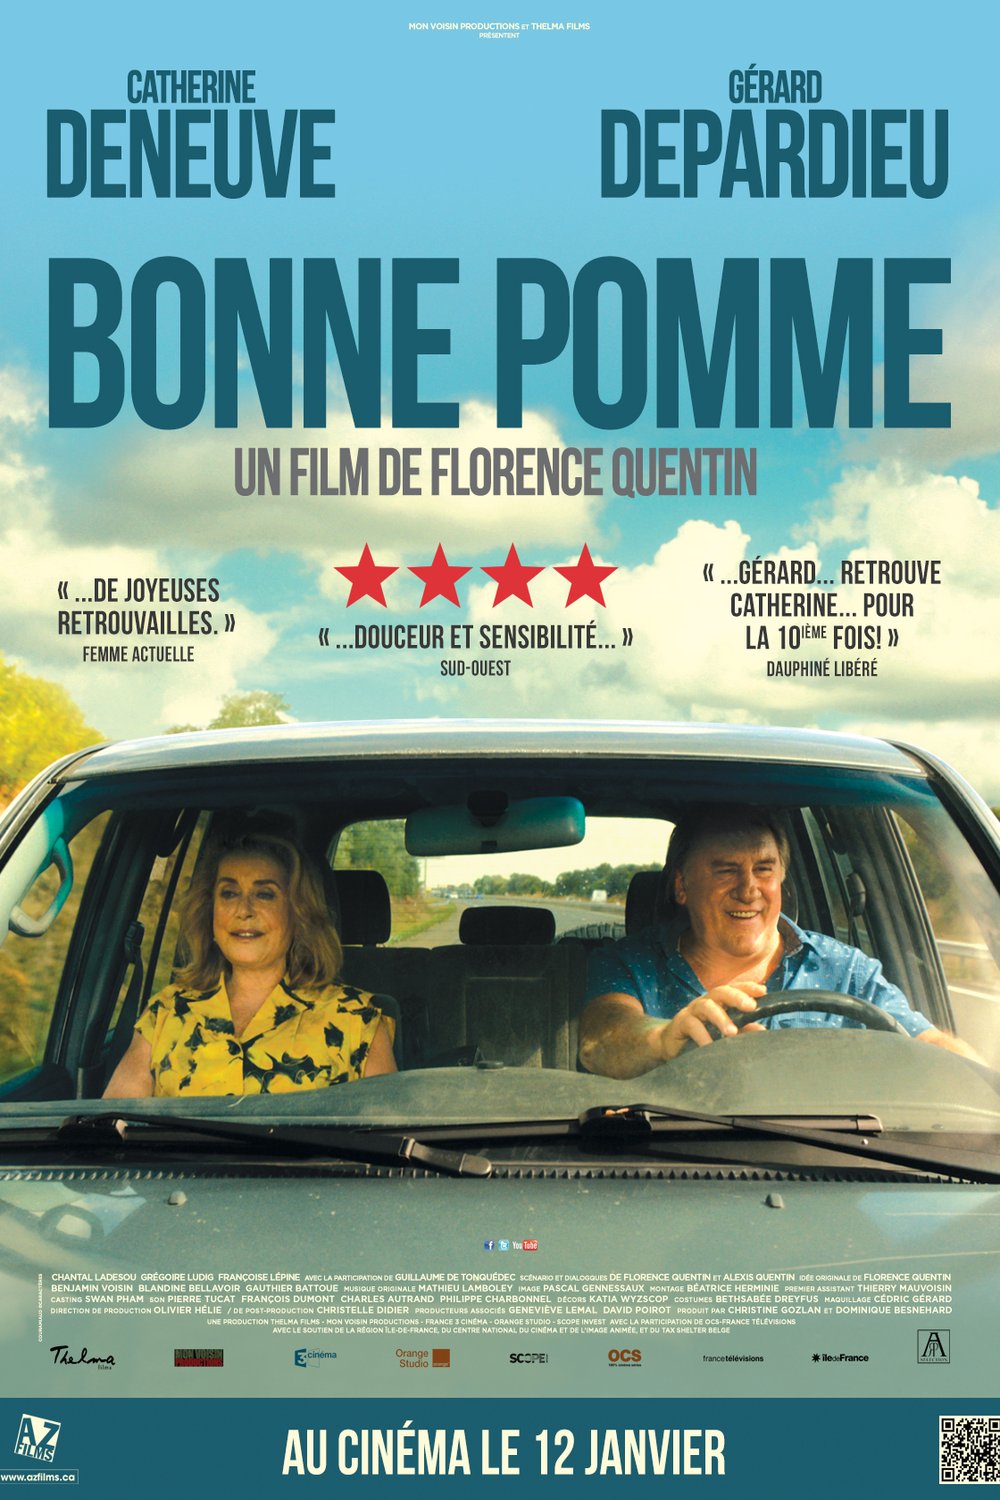 Bonne pomme (2017) by Florence Quentin